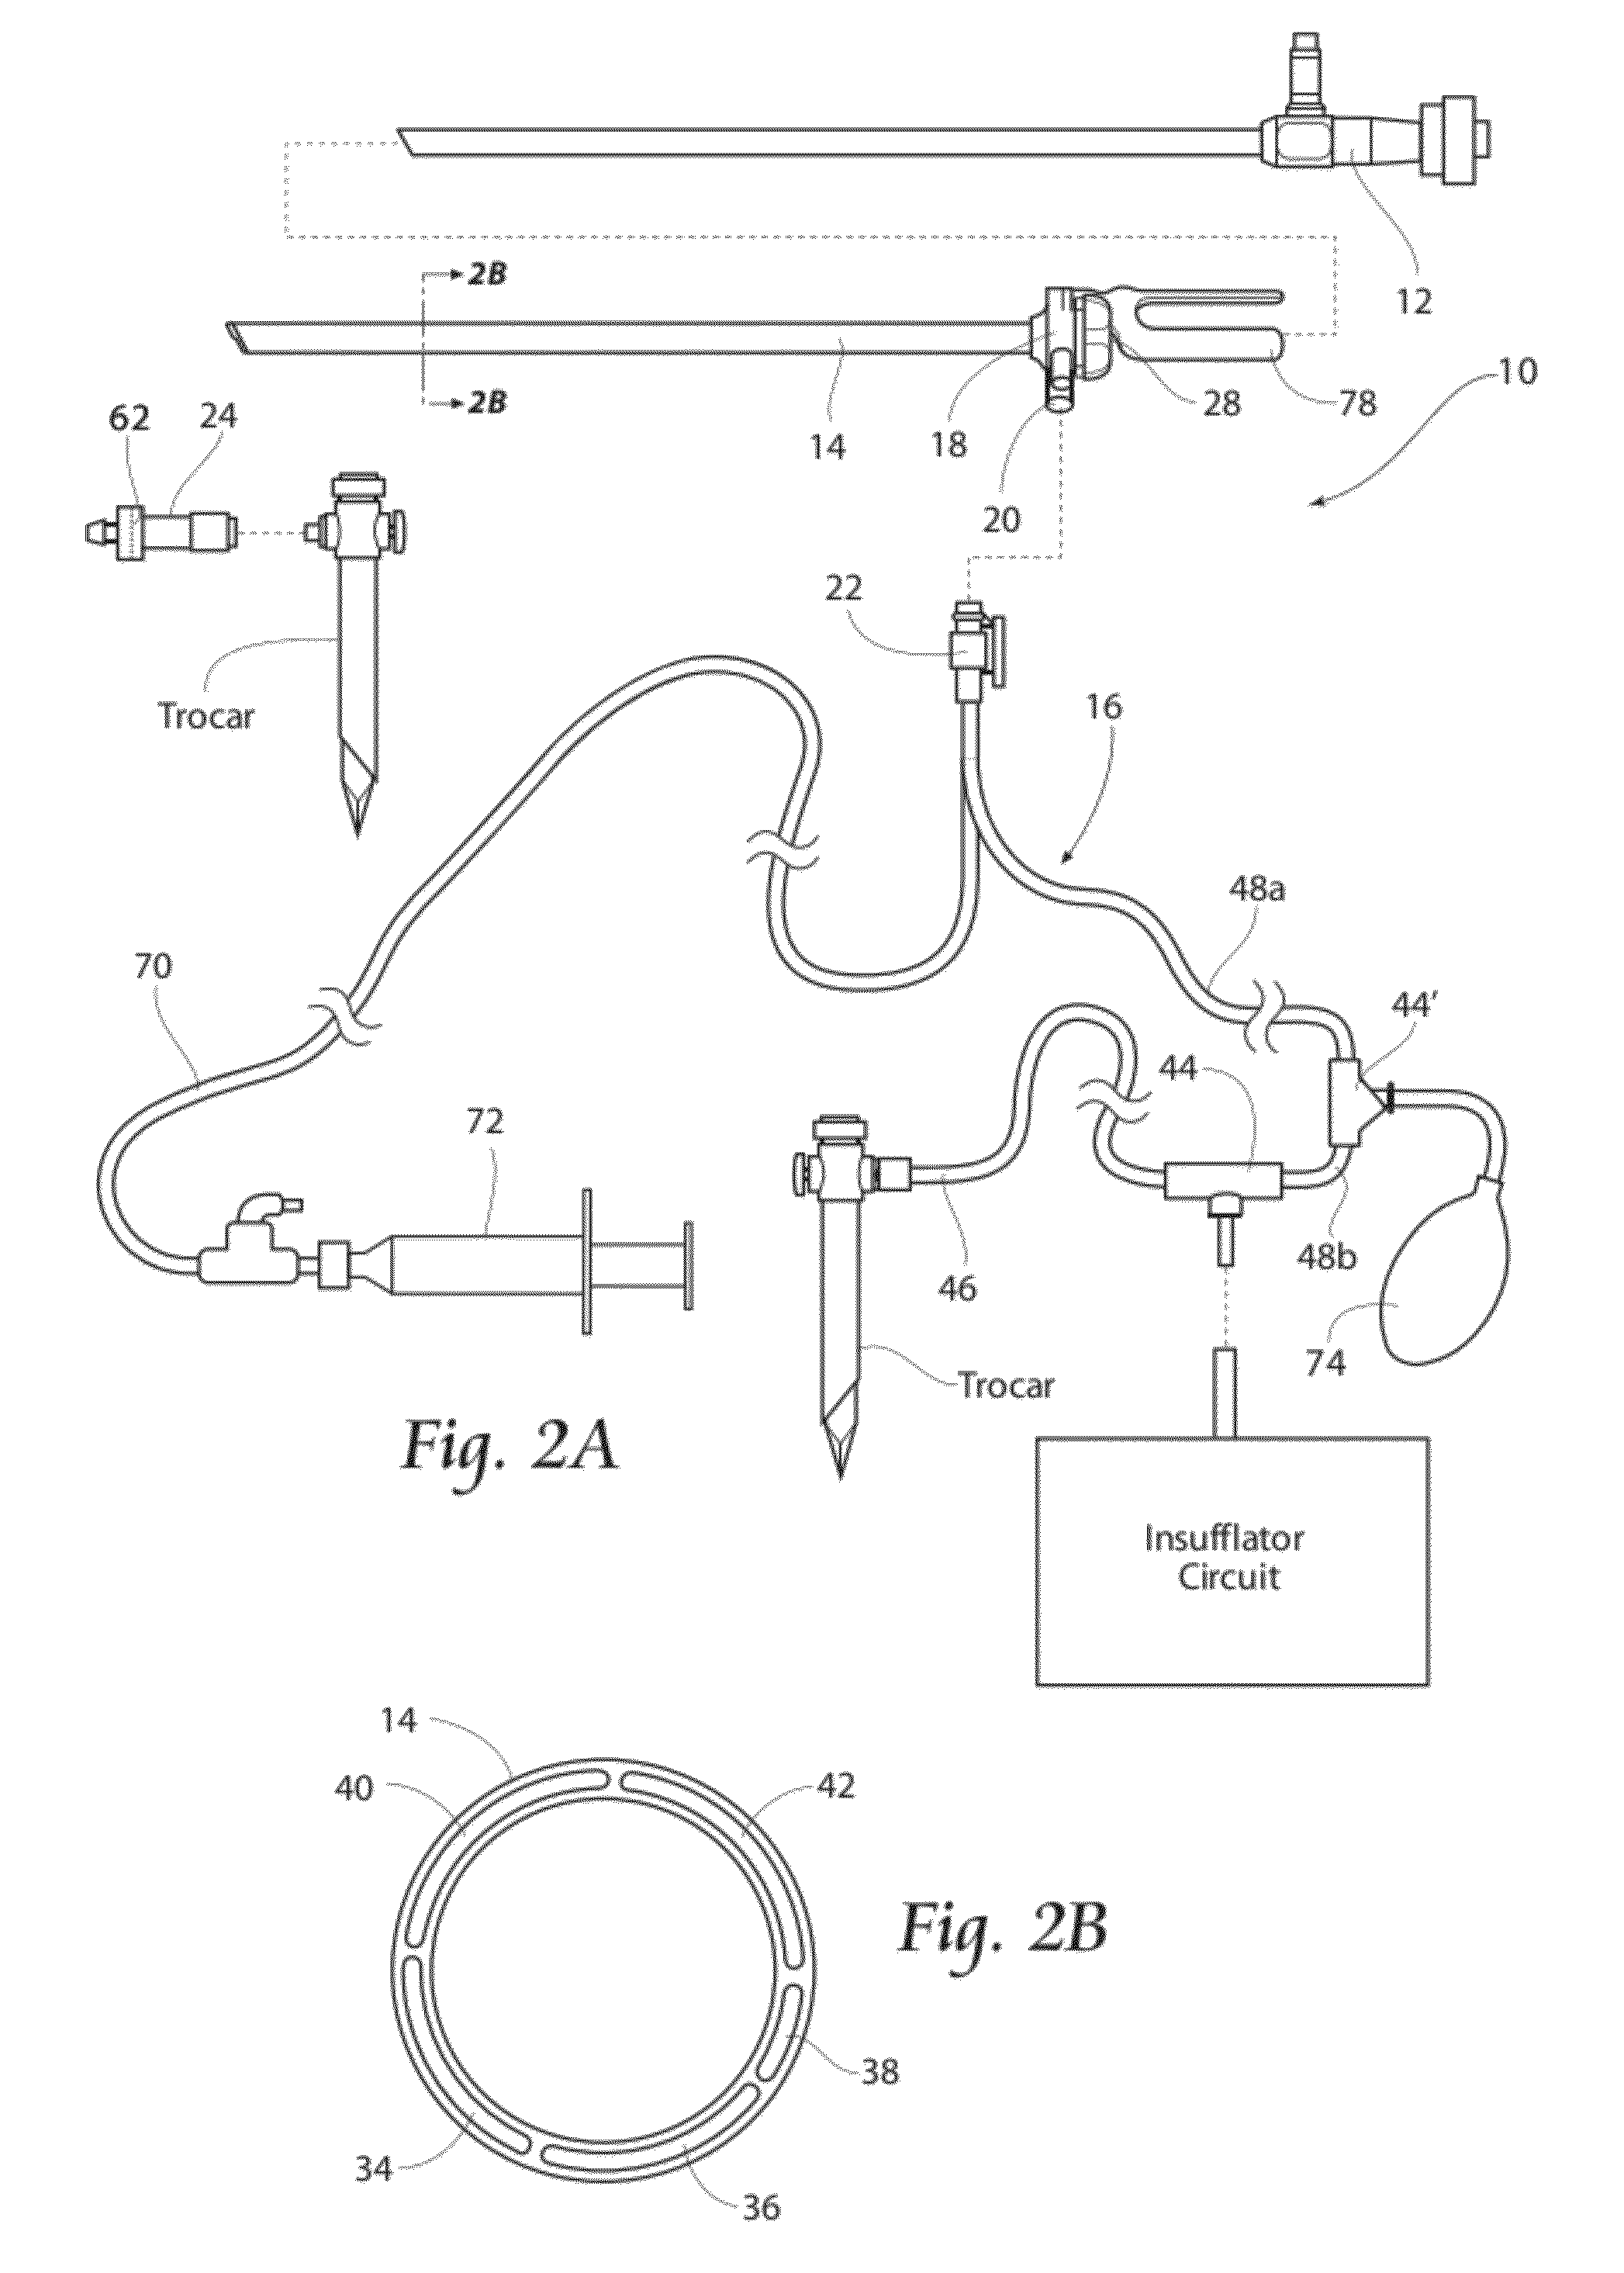 Systems and methods for optimizing and maintaining visualization of a surgical field during the use of surgical scopes